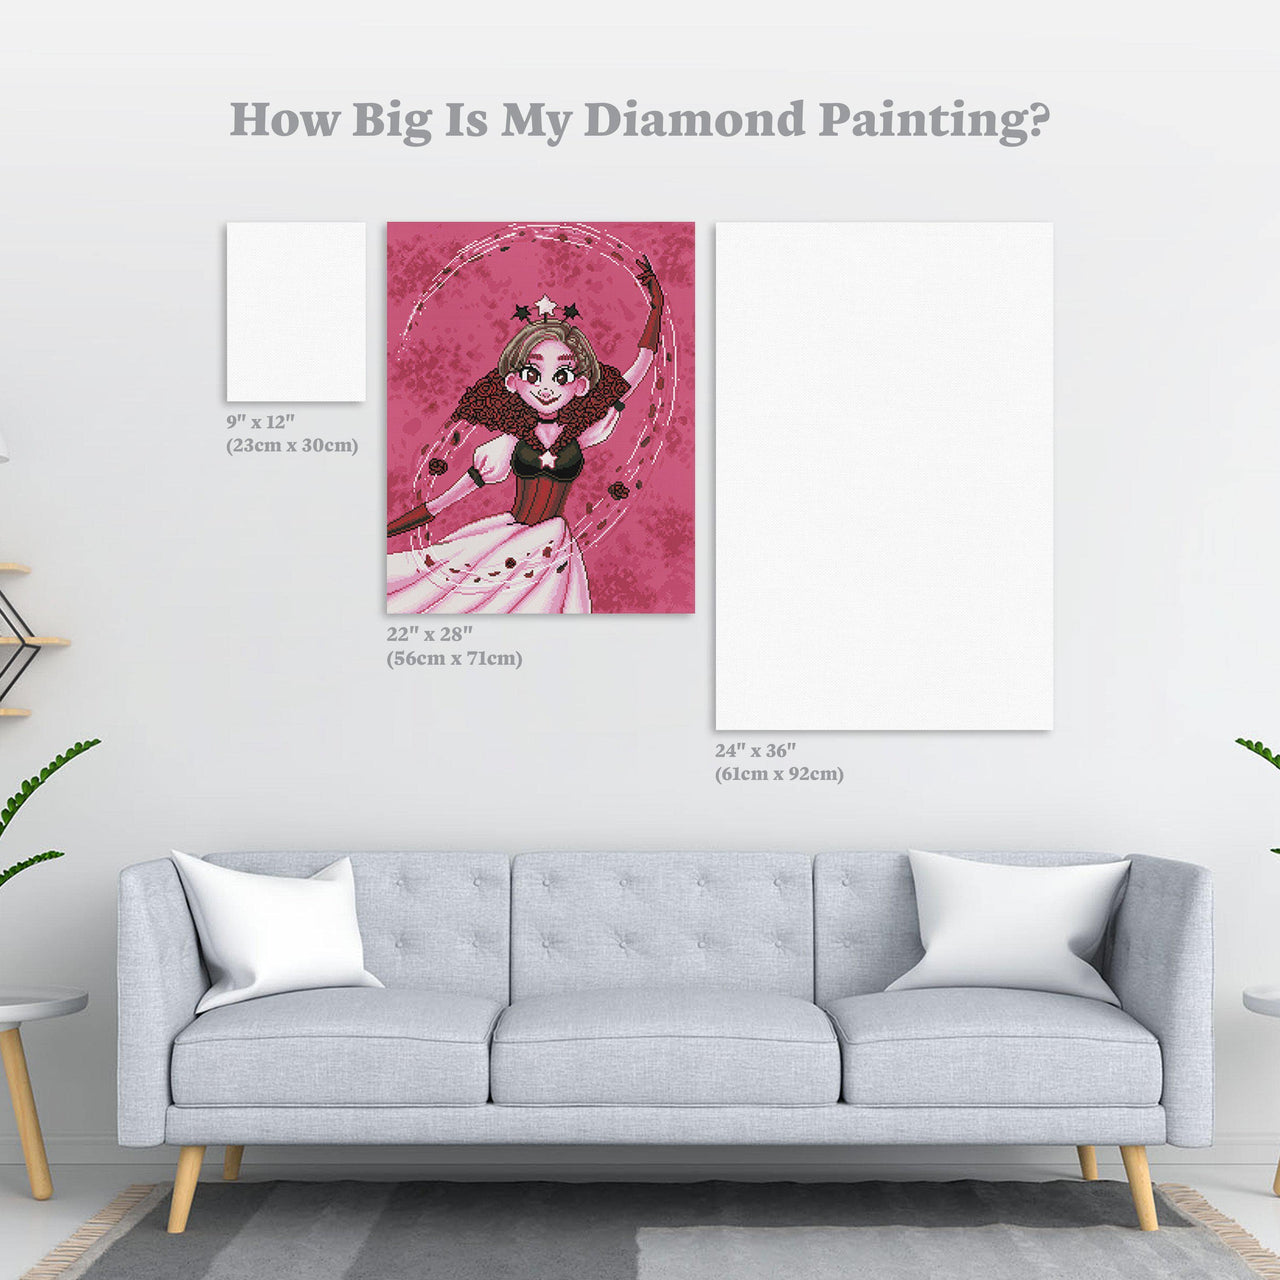 Diamond Painting Petal Dance 22" x 28″ (56cm x 71cm) / Round With 21 Colors Including 2 ABs / 49,896